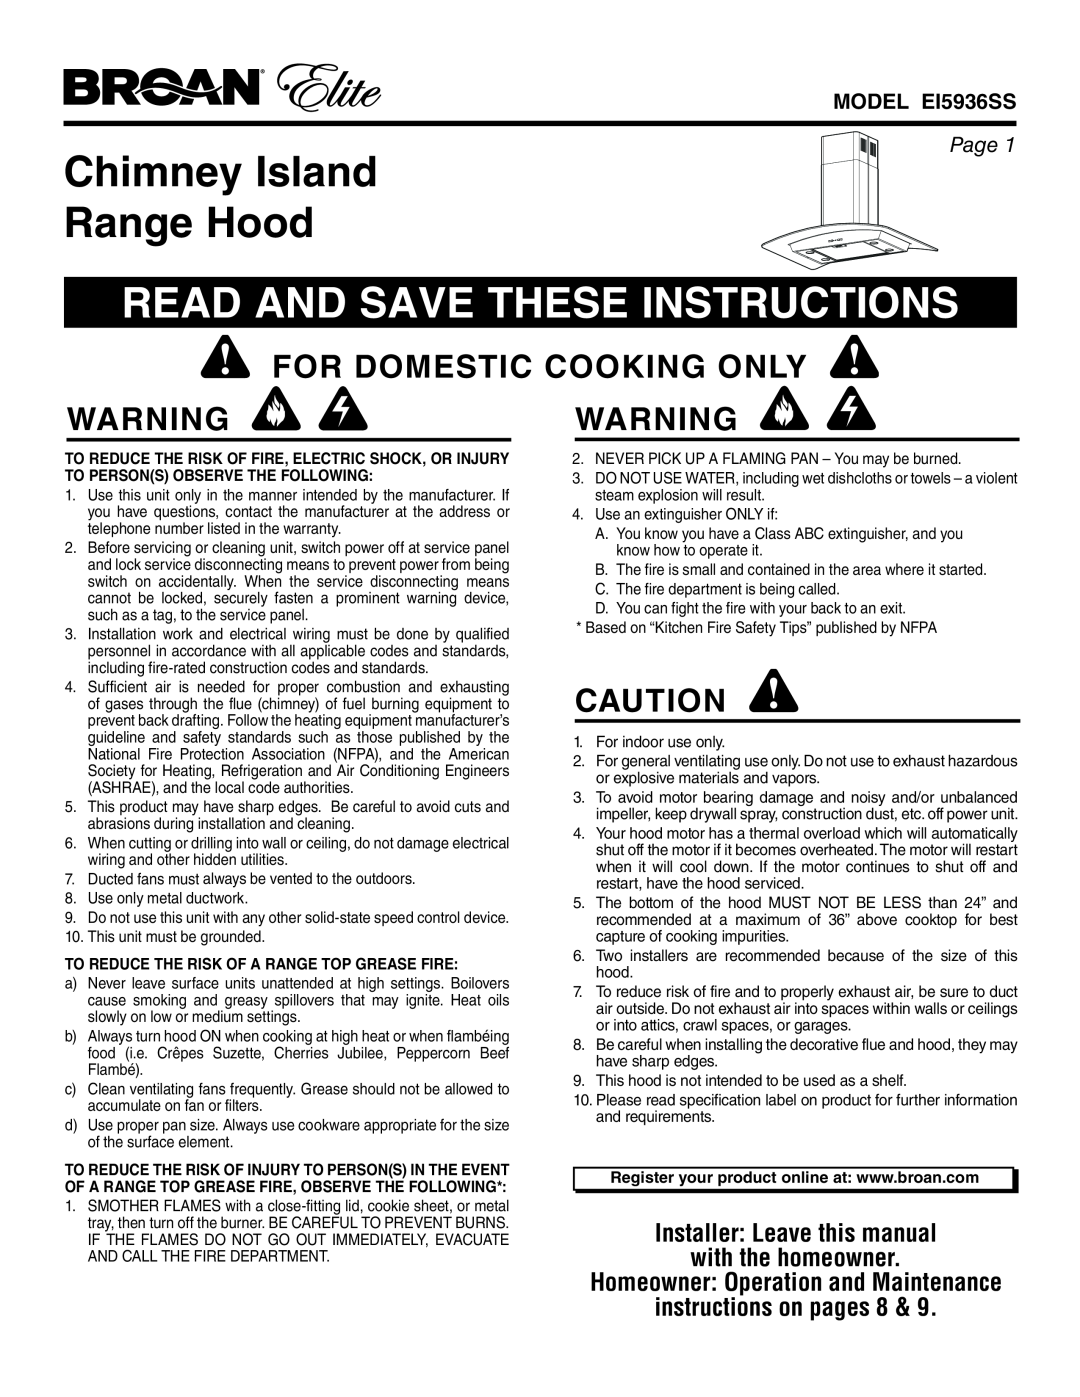 Broan EI5936SS warranty Chimney Island Range Hood, Read And Save These Instructions, For Domestic Cooking Only, Page 